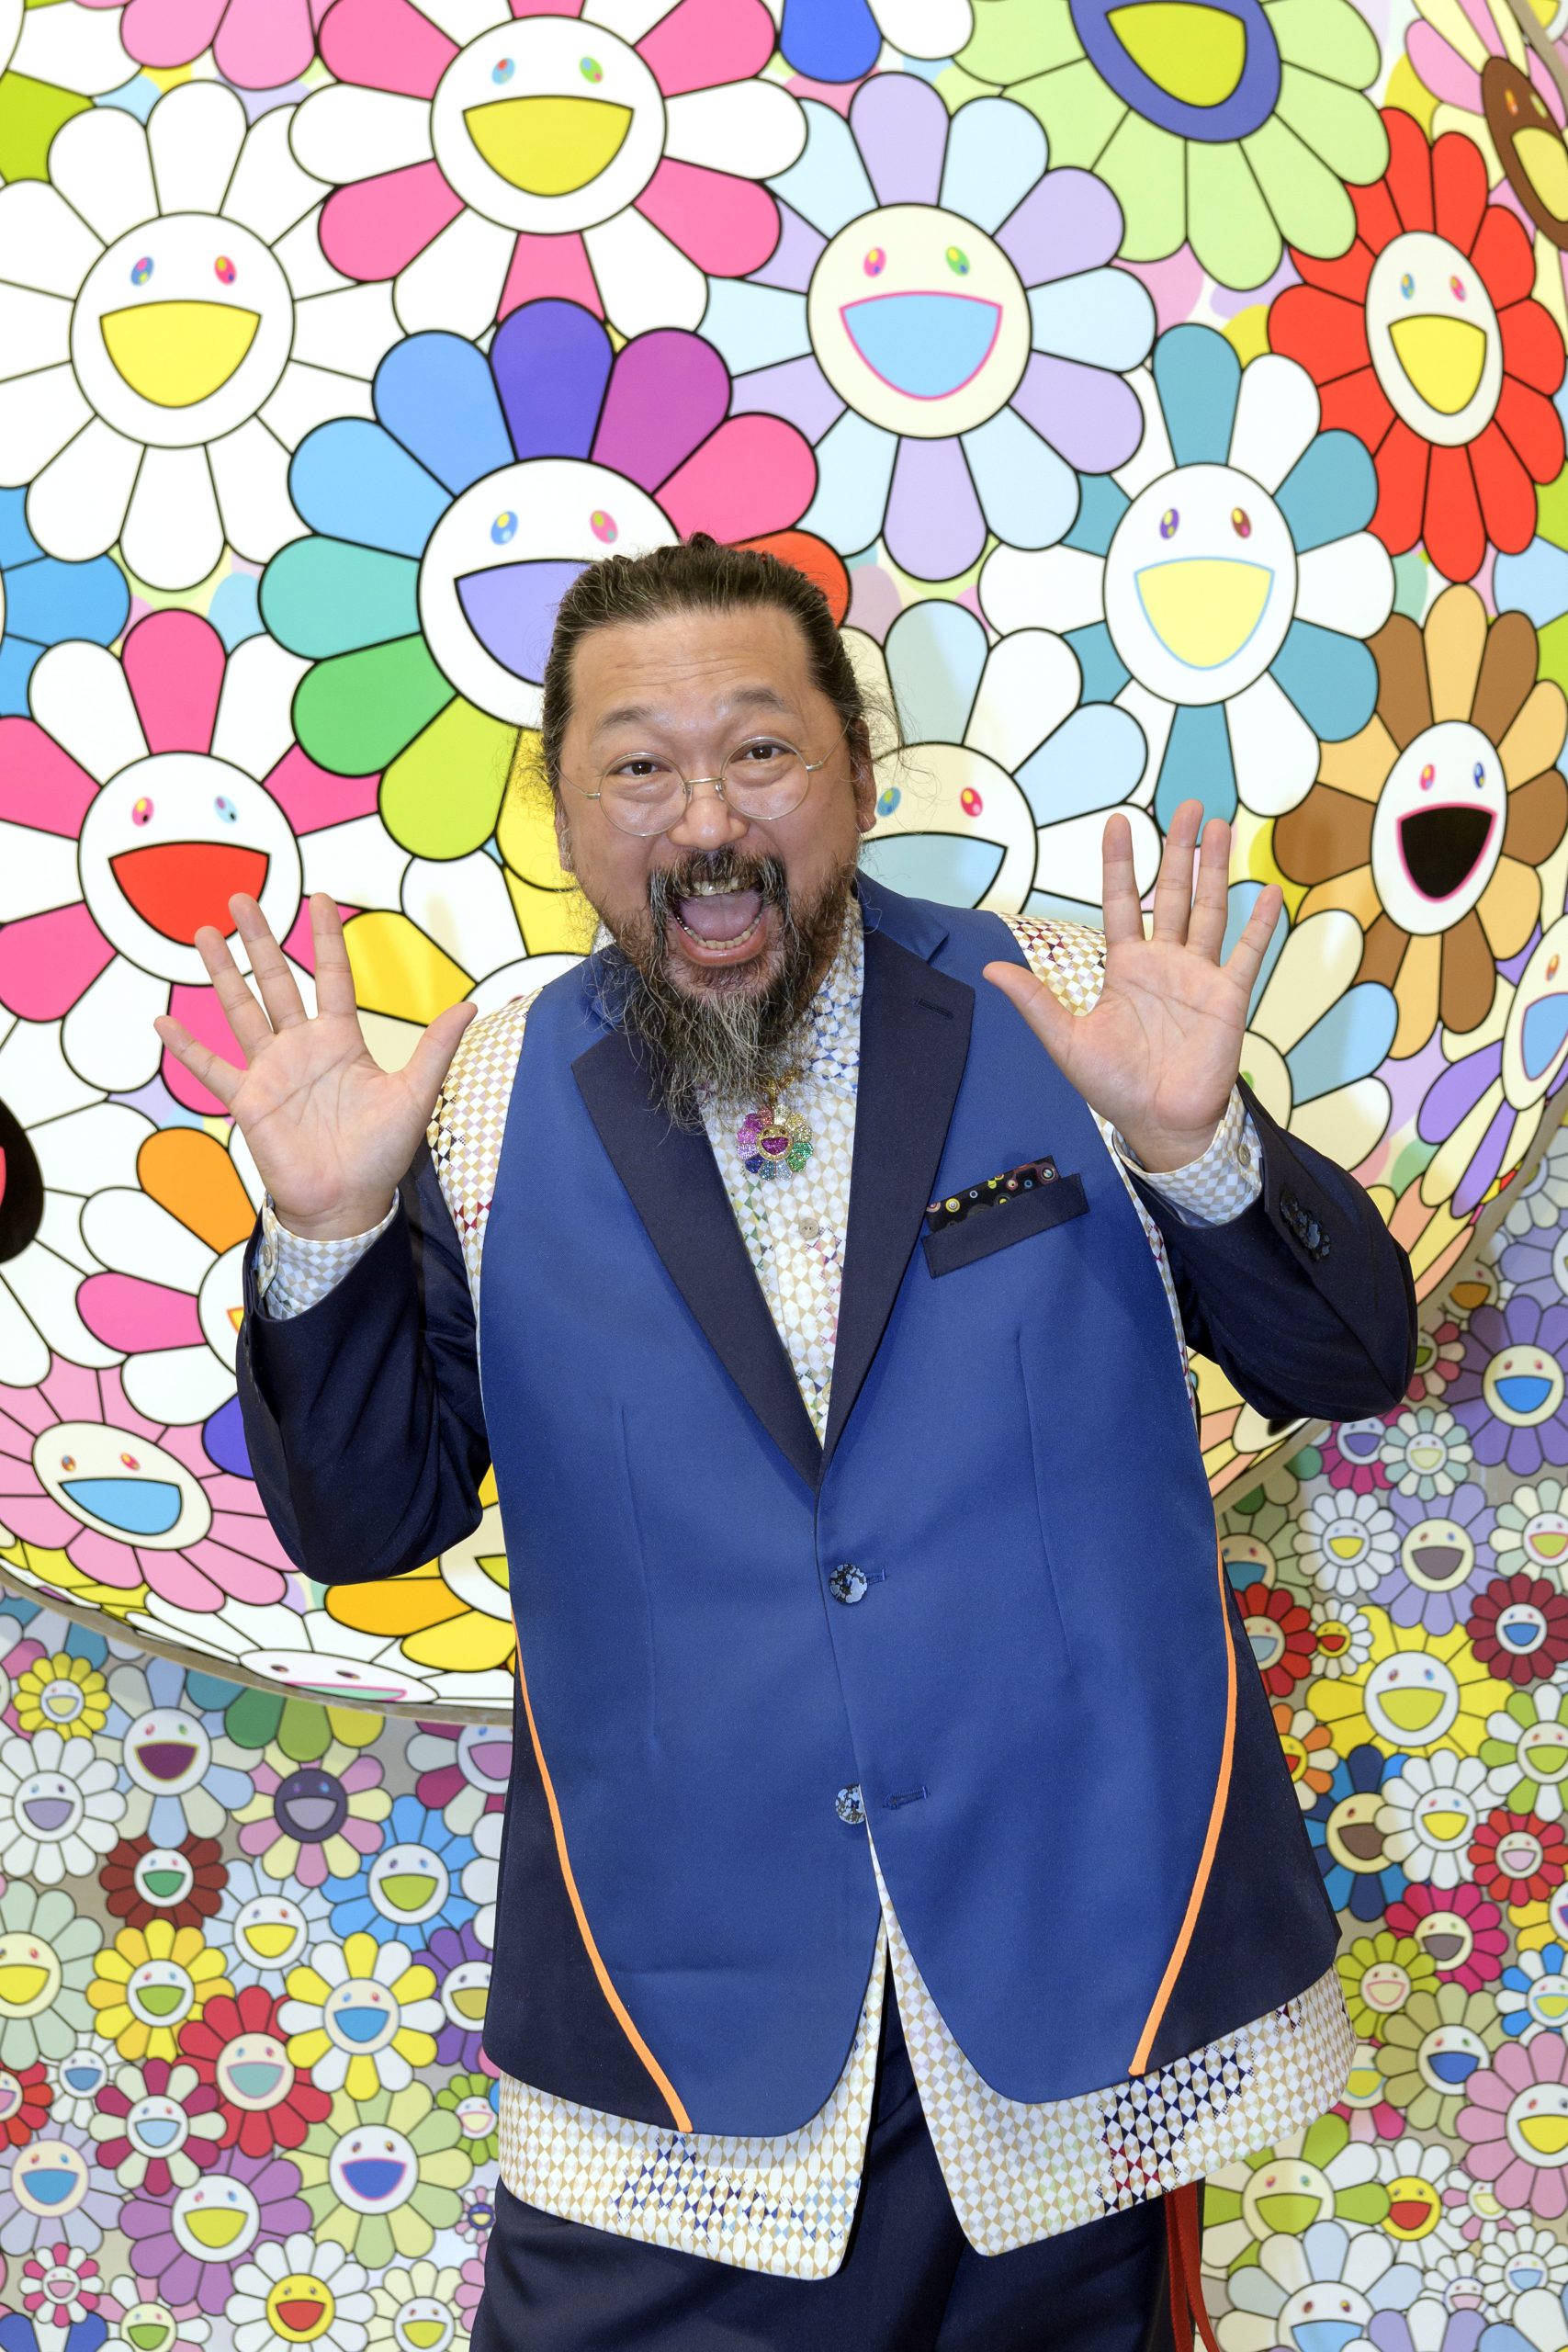 A photograph of Takashi Murakami, a Japanese man with his mouth open and his hands raised in the air in a playful manner. He is wearing a long blue jacket. The background features smiling flowers in various colors.